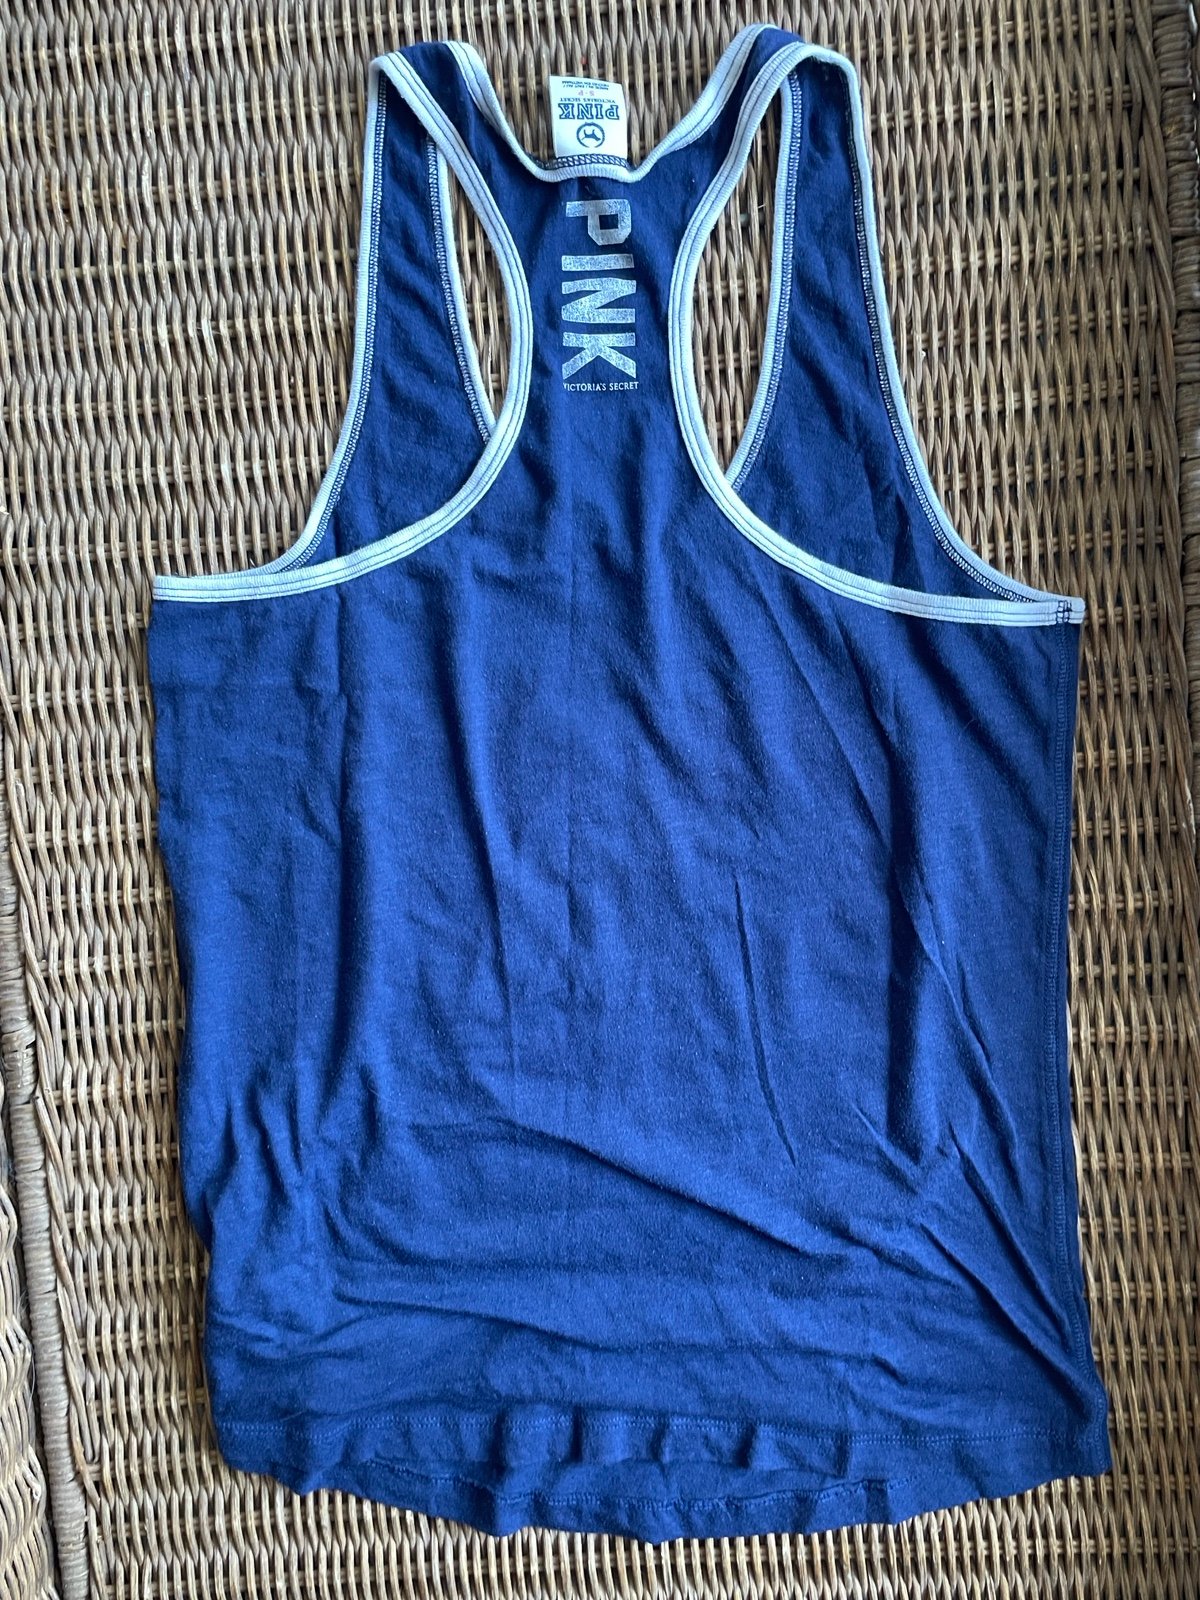 cheapest place to buy  Racerback Tank Top Np9O6sfkD Counter Genuine 